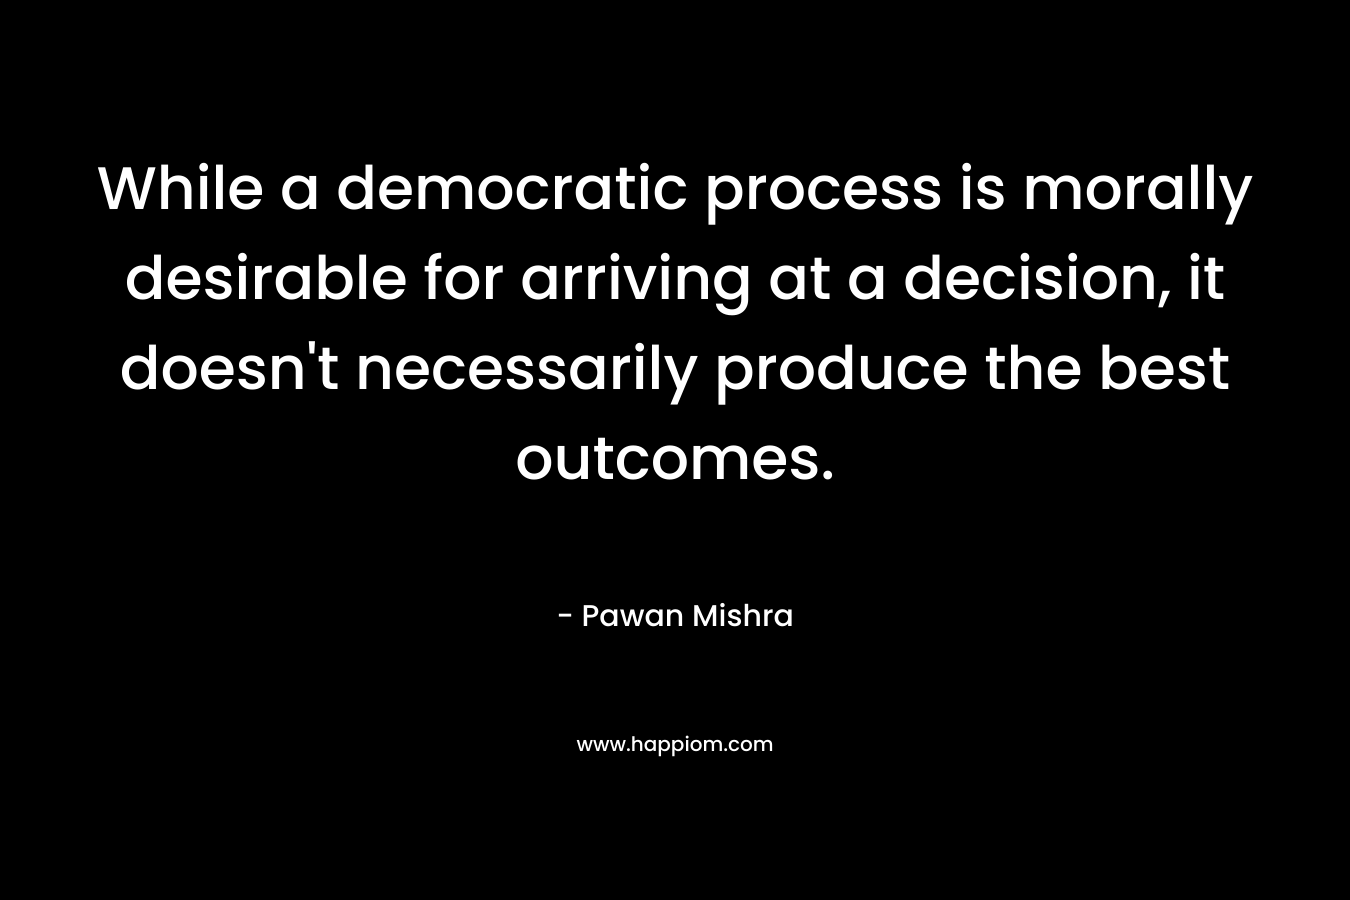 While a democratic process is morally desirable for arriving at a decision, it doesn’t necessarily produce the best outcomes. – Pawan Mishra